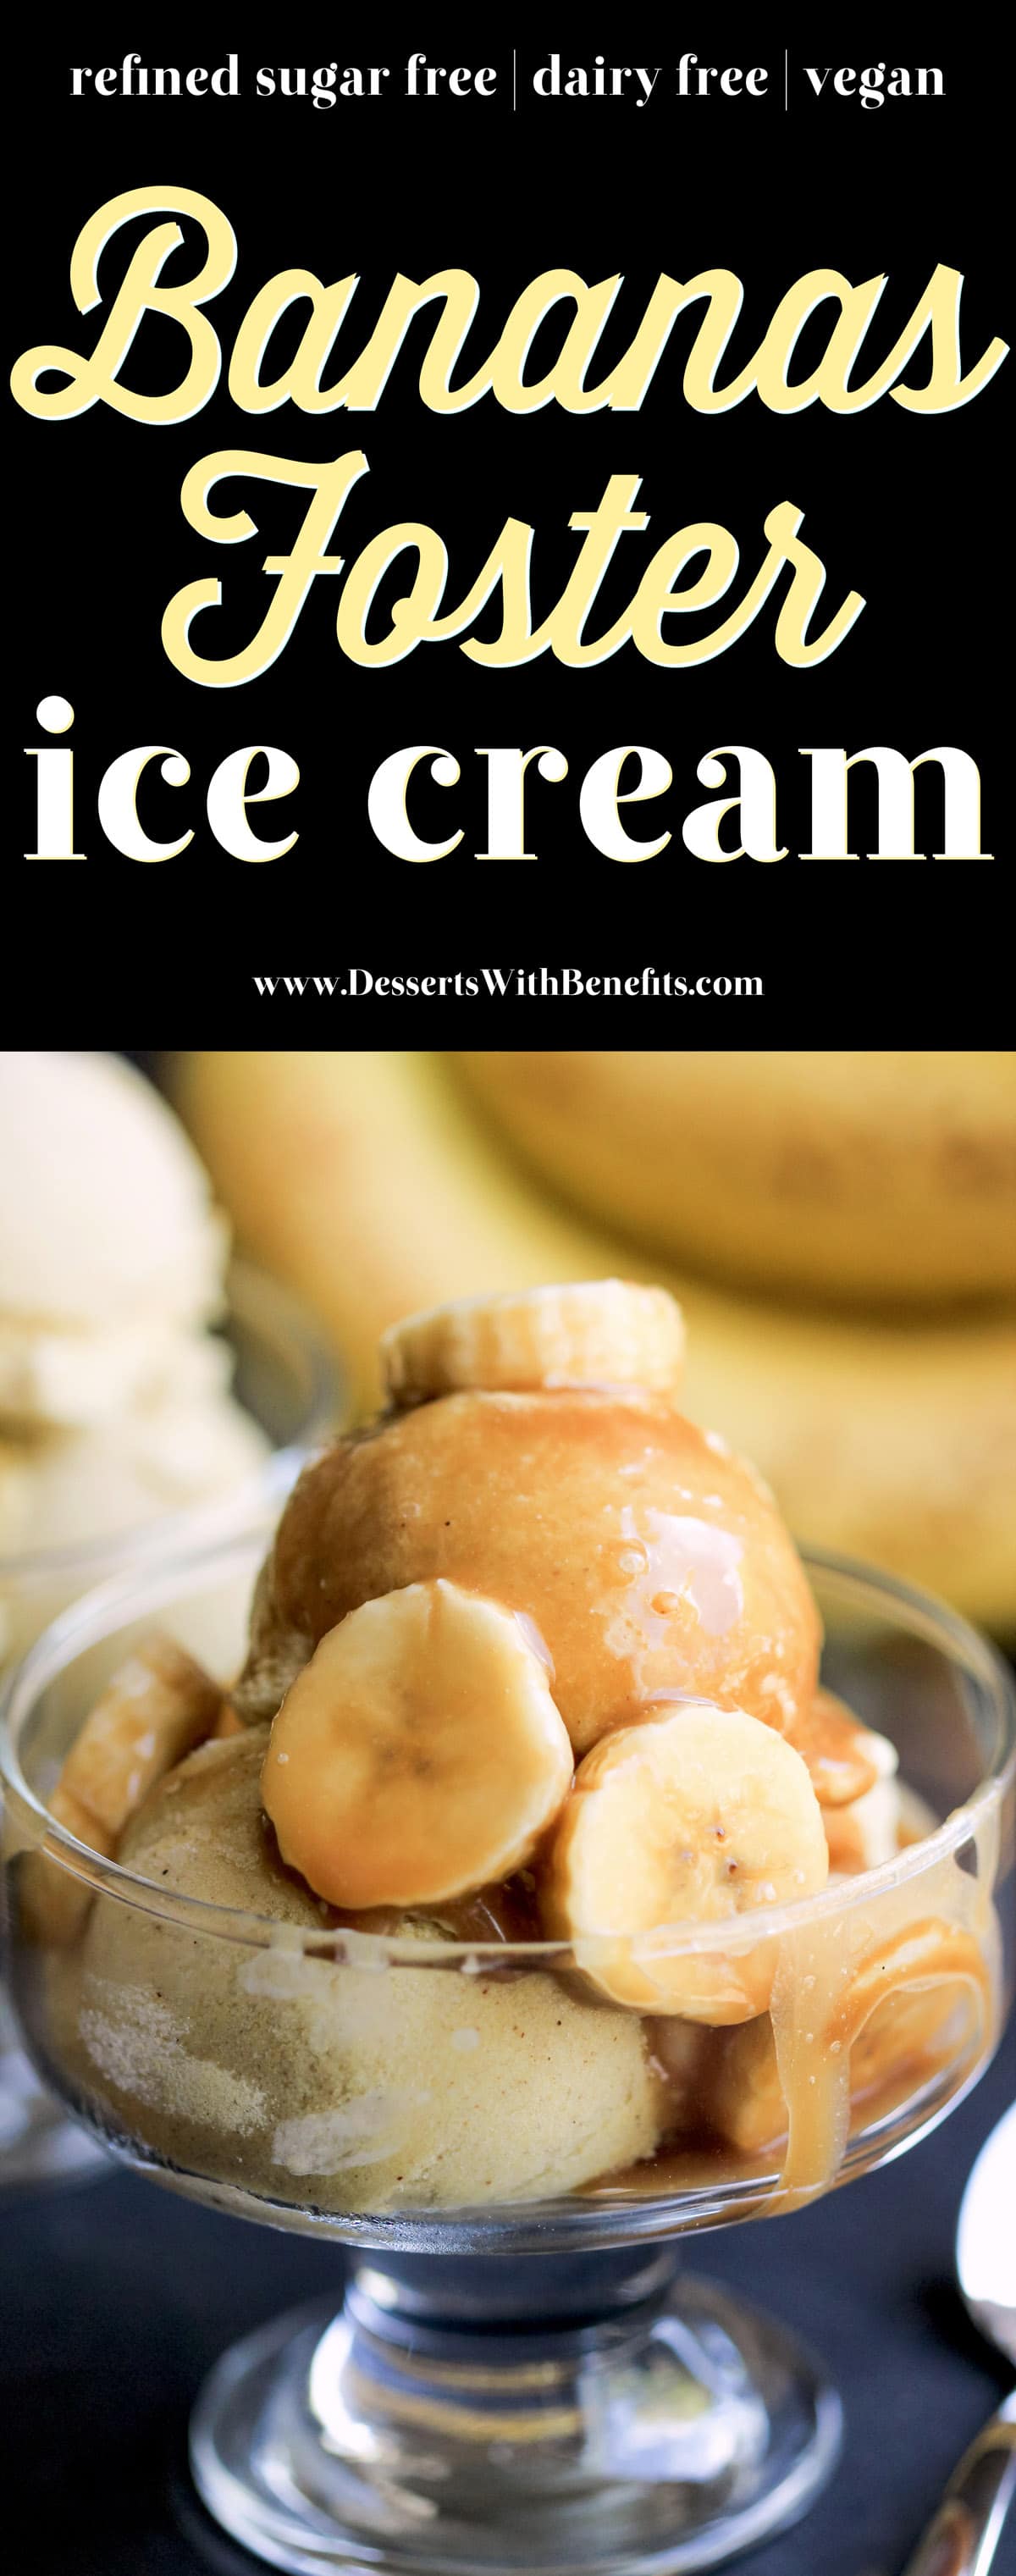 This Healthy Bananas Foster Ice Cream is so sweet, creamy, rich, and delicious, you’ll have a hard time believing it’s refined sugar free, dairy free, and VEGAN! Healthy Dessert Recipes with sugar free, low calorie, low fat, low carb, high protein, gluten free, dairy free, vegan, and raw options at the Desserts With Benefits Blog (www.DessertsWithBenefits.com)